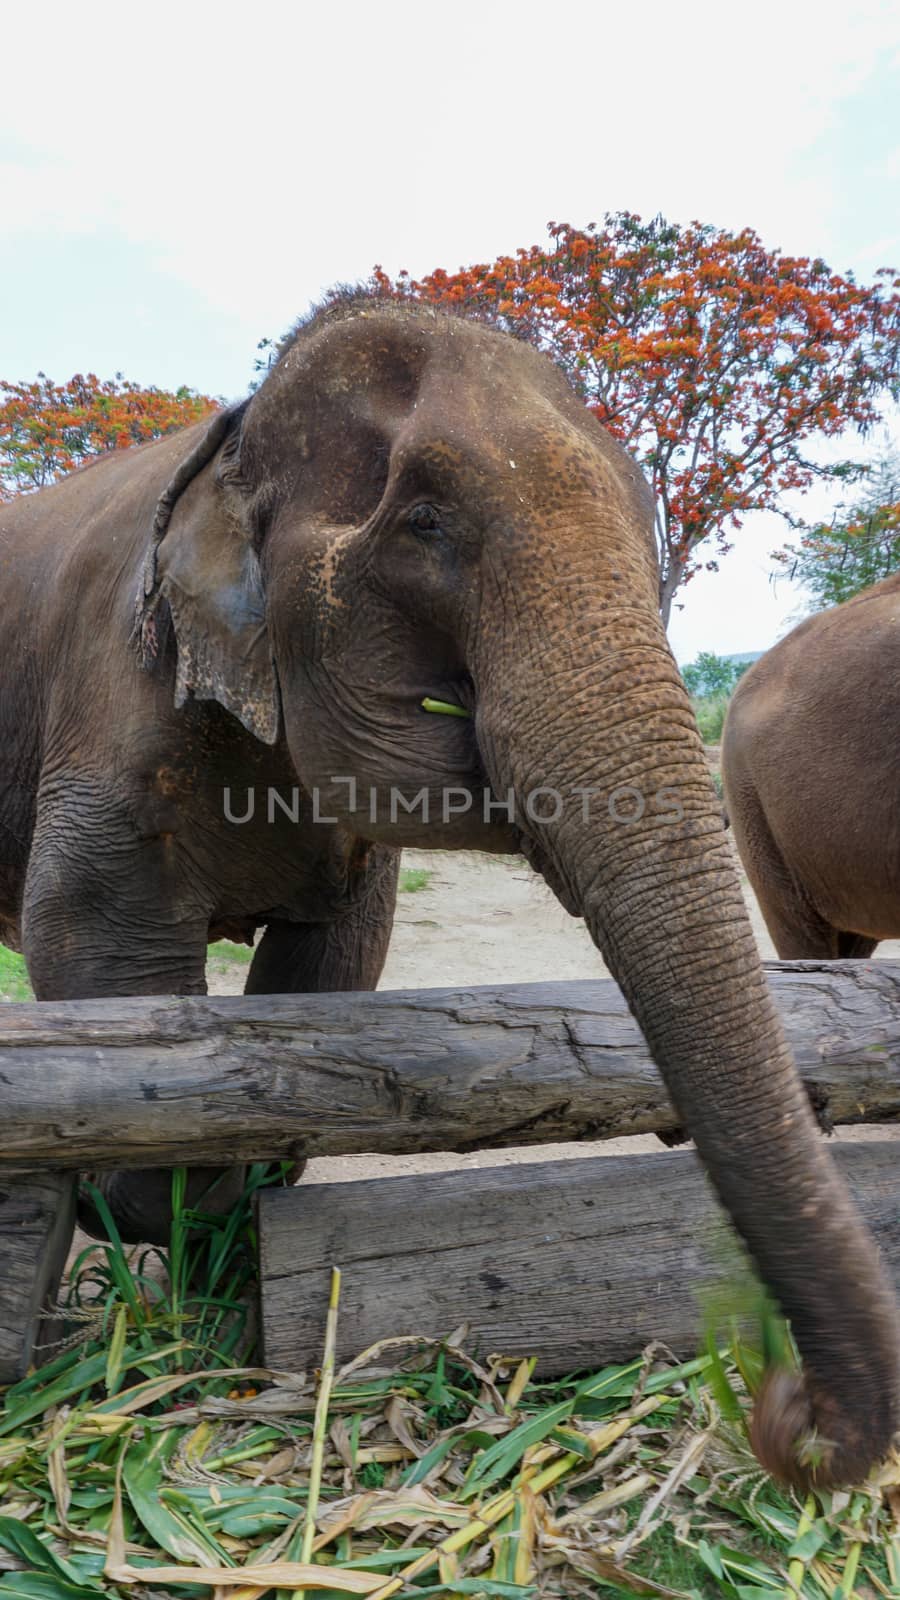 Group of adult elephants feeding sugar cane and bamboo in Elepha by sonandonures